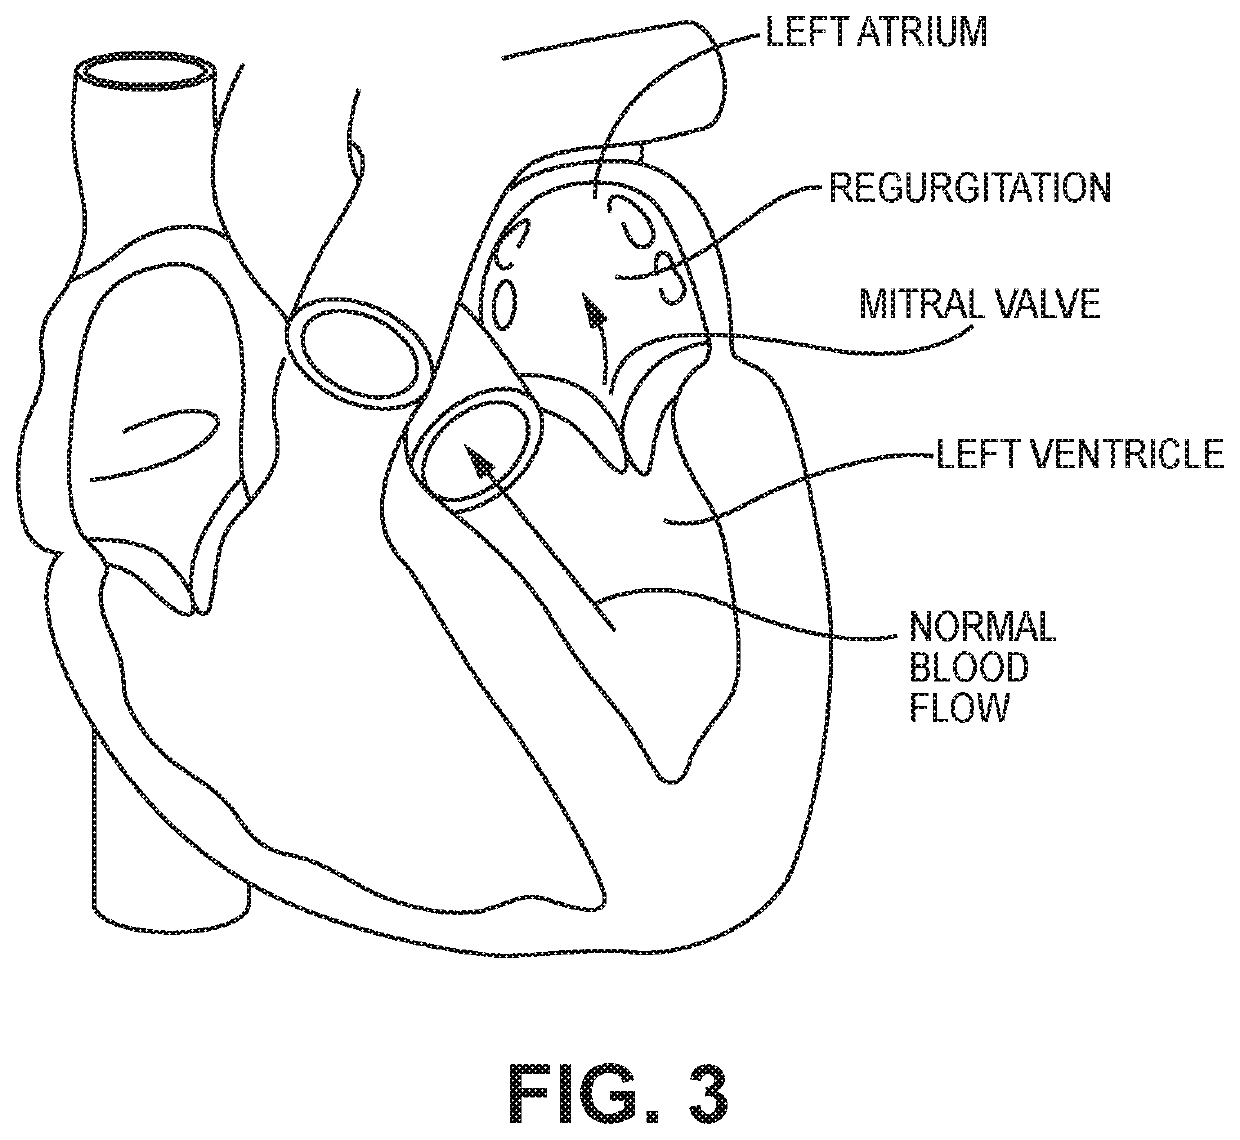 Hydrophilic skirt for paravalvular leak mitigation and fit and apposition optimization for prosthetic heart valve implants